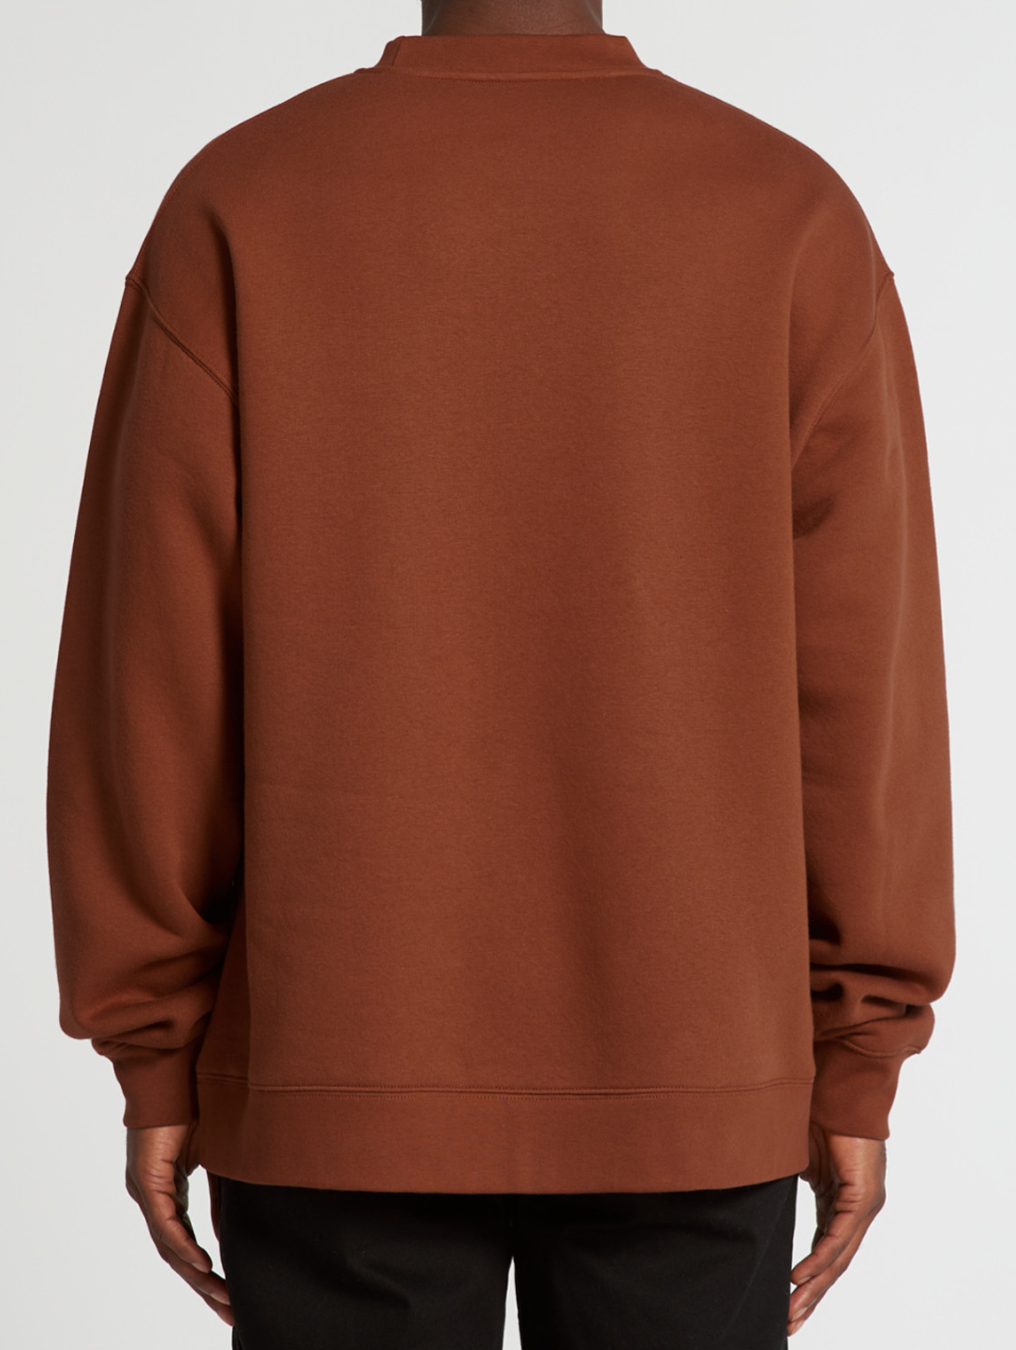 Relaxed Fit Premium Sweatshirt | 10 Colours